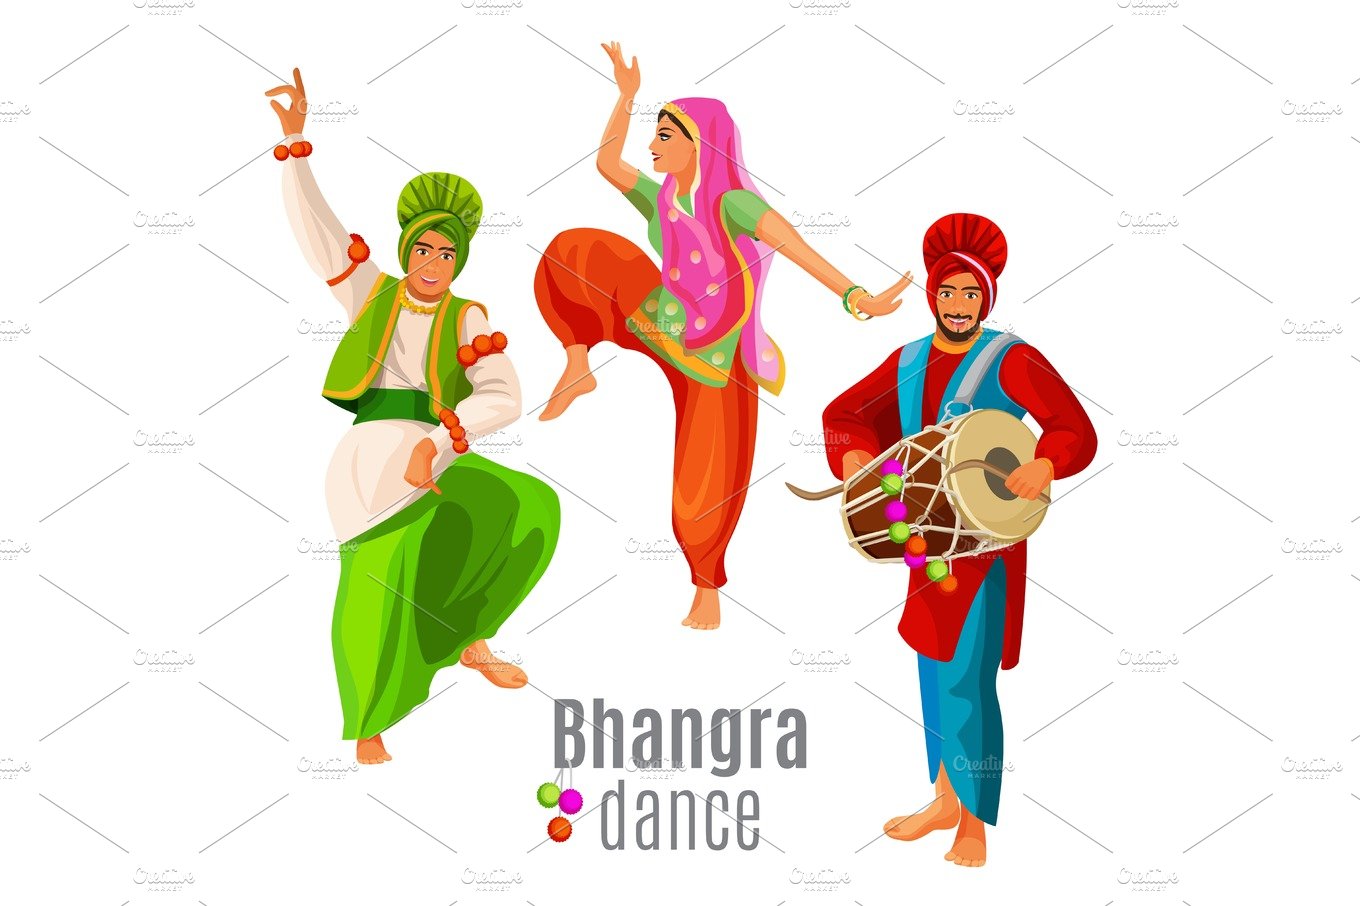 Bhangra dance concept men and woman in national cloth dancing cover image.